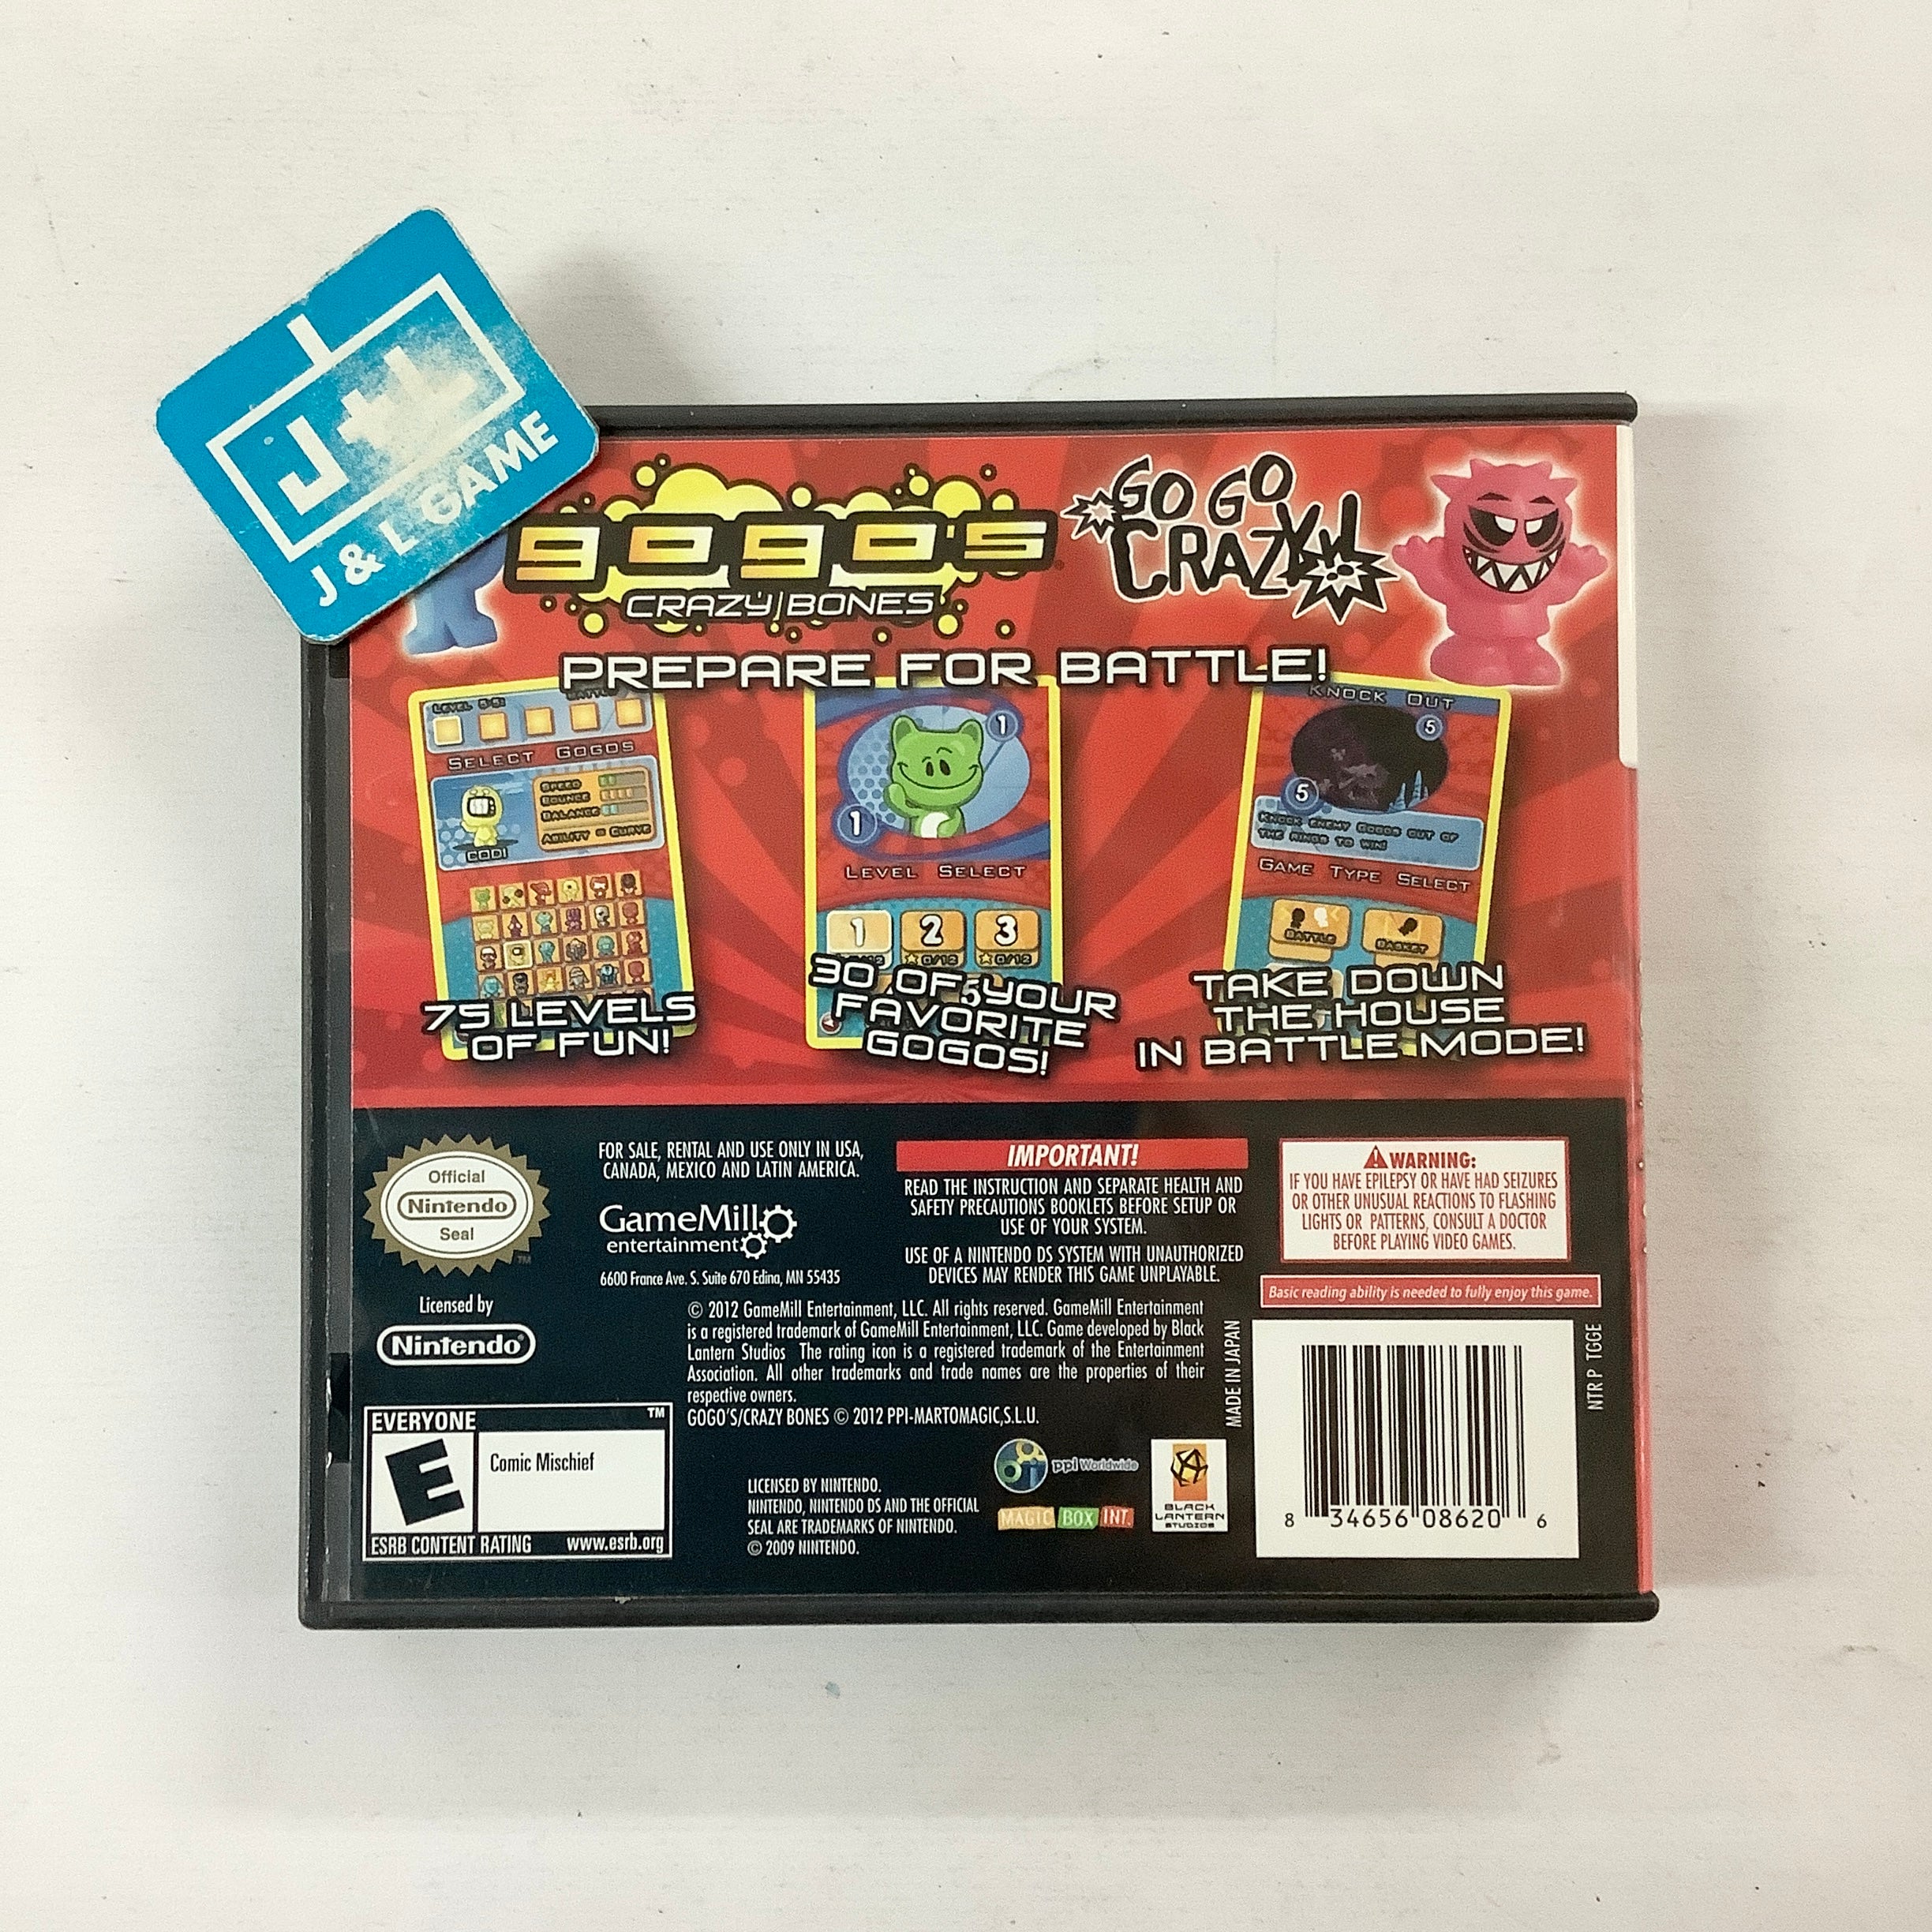 Gogo's Crazy Bones - (NDS) Nintendo DS [Pre-Owned] Video Games Game Mill   